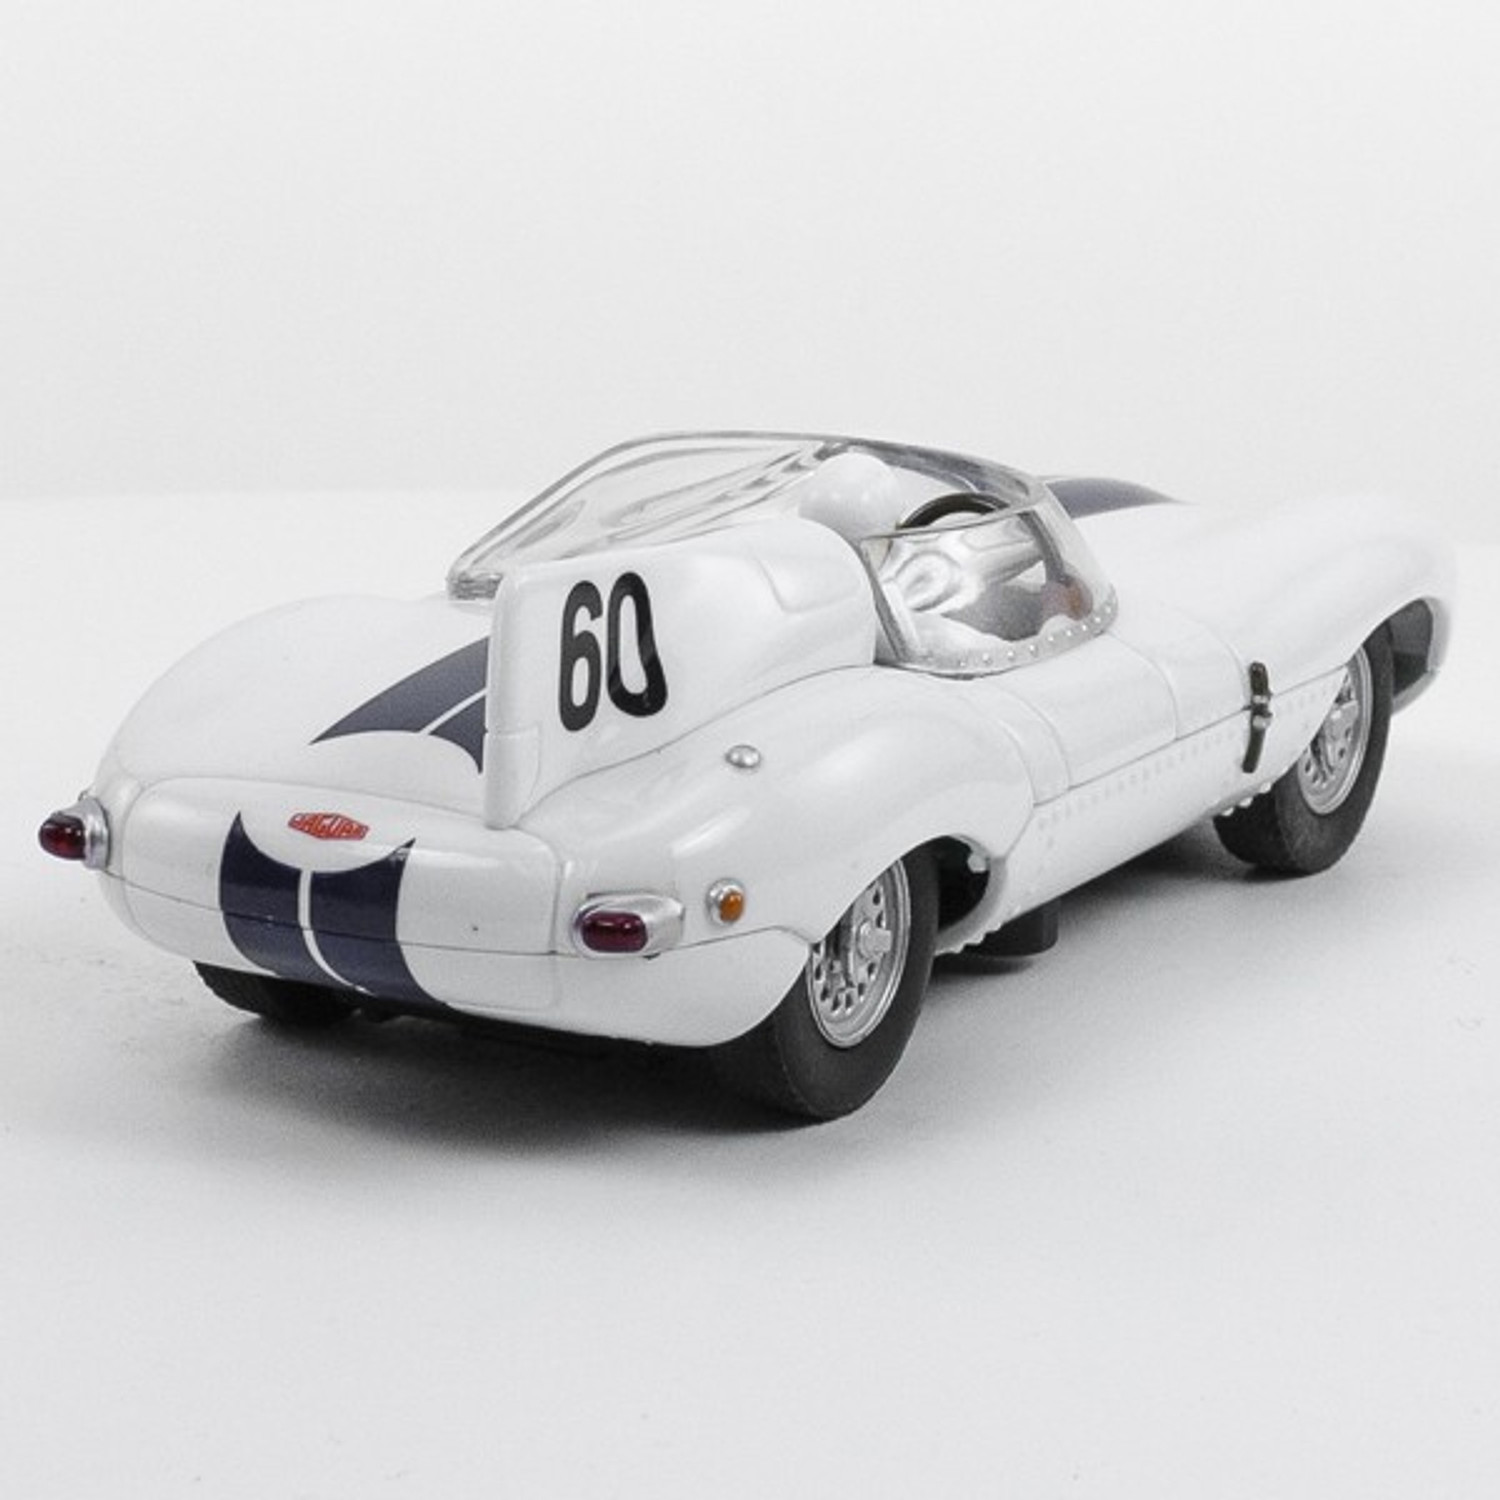 Stock Number: 16260 - White Black Open Top Number 60 Car by Unknown